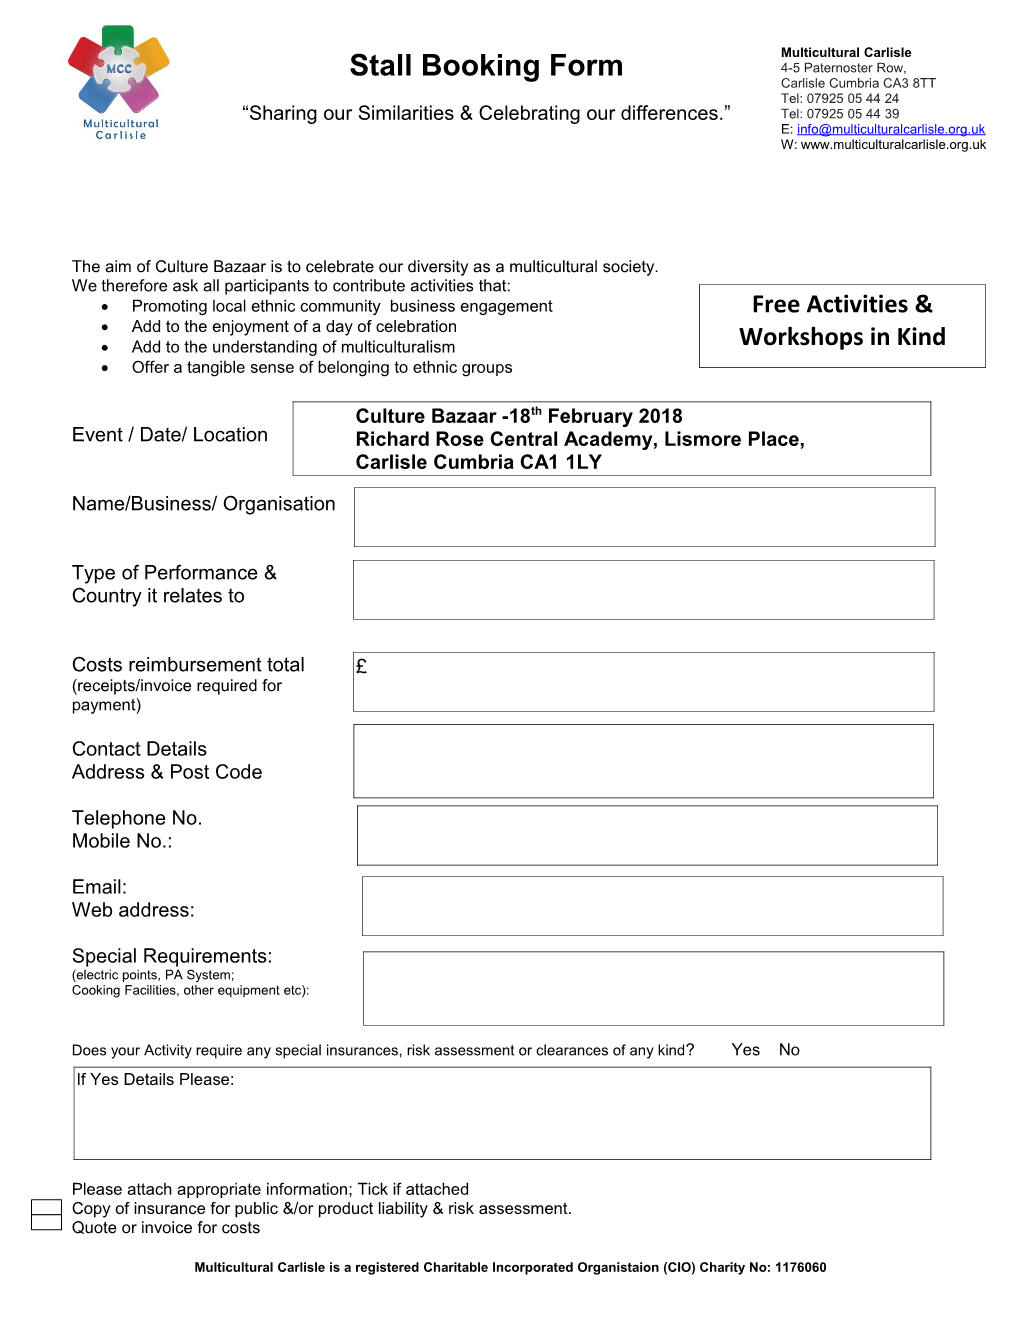 Stall Booking Form